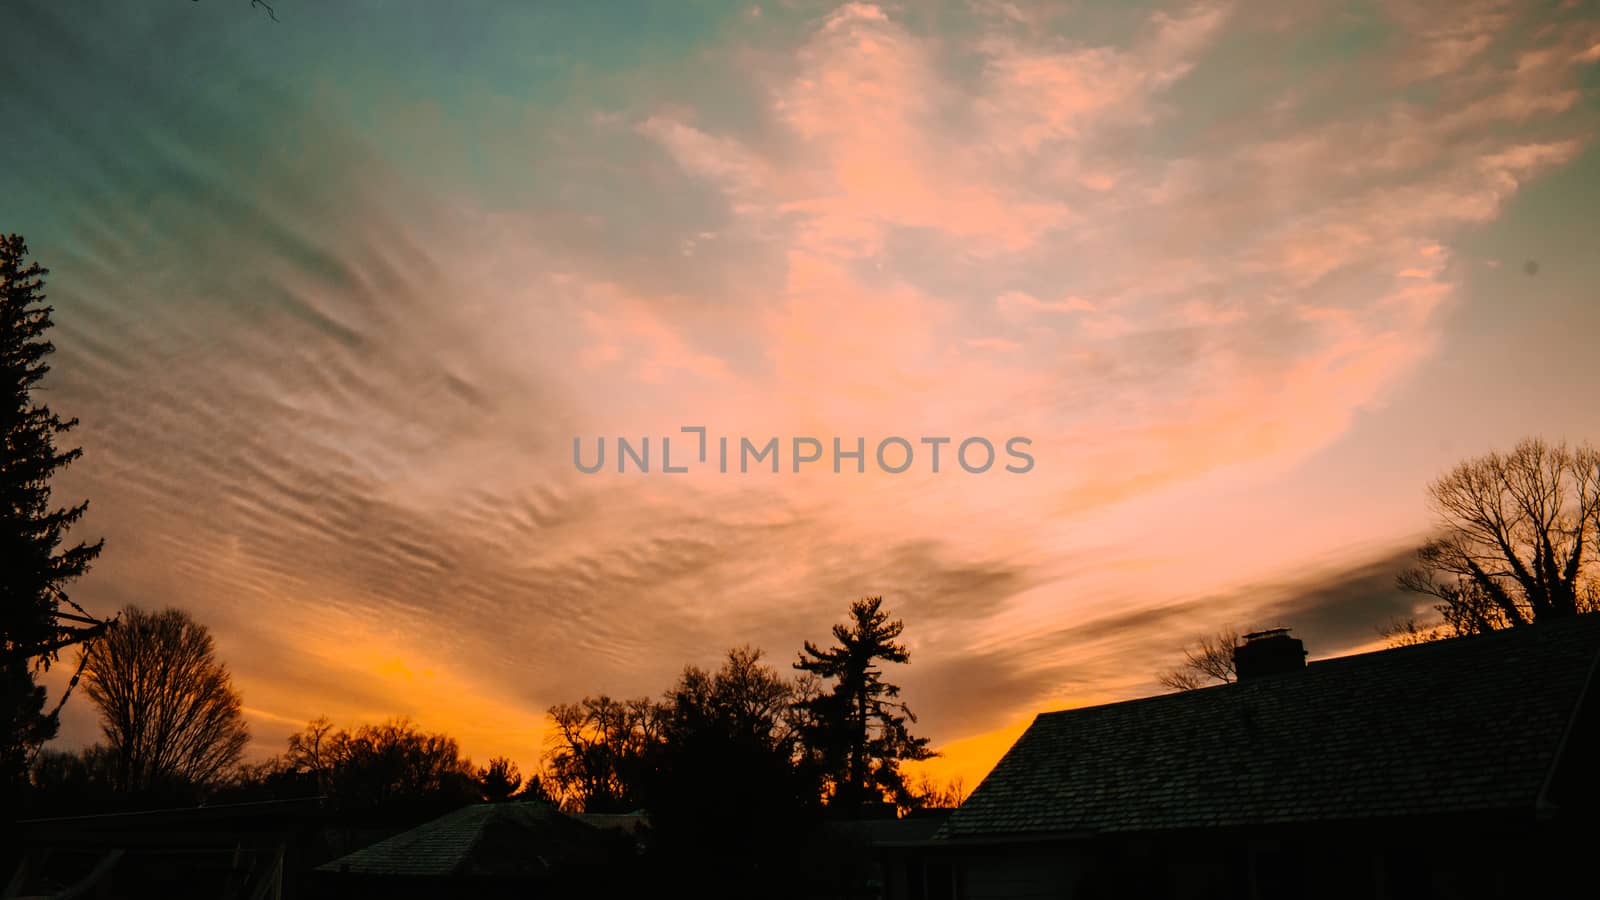 A Dramatic Orange and Blue Sunset With Silhouetted Trees at the  by bju12290